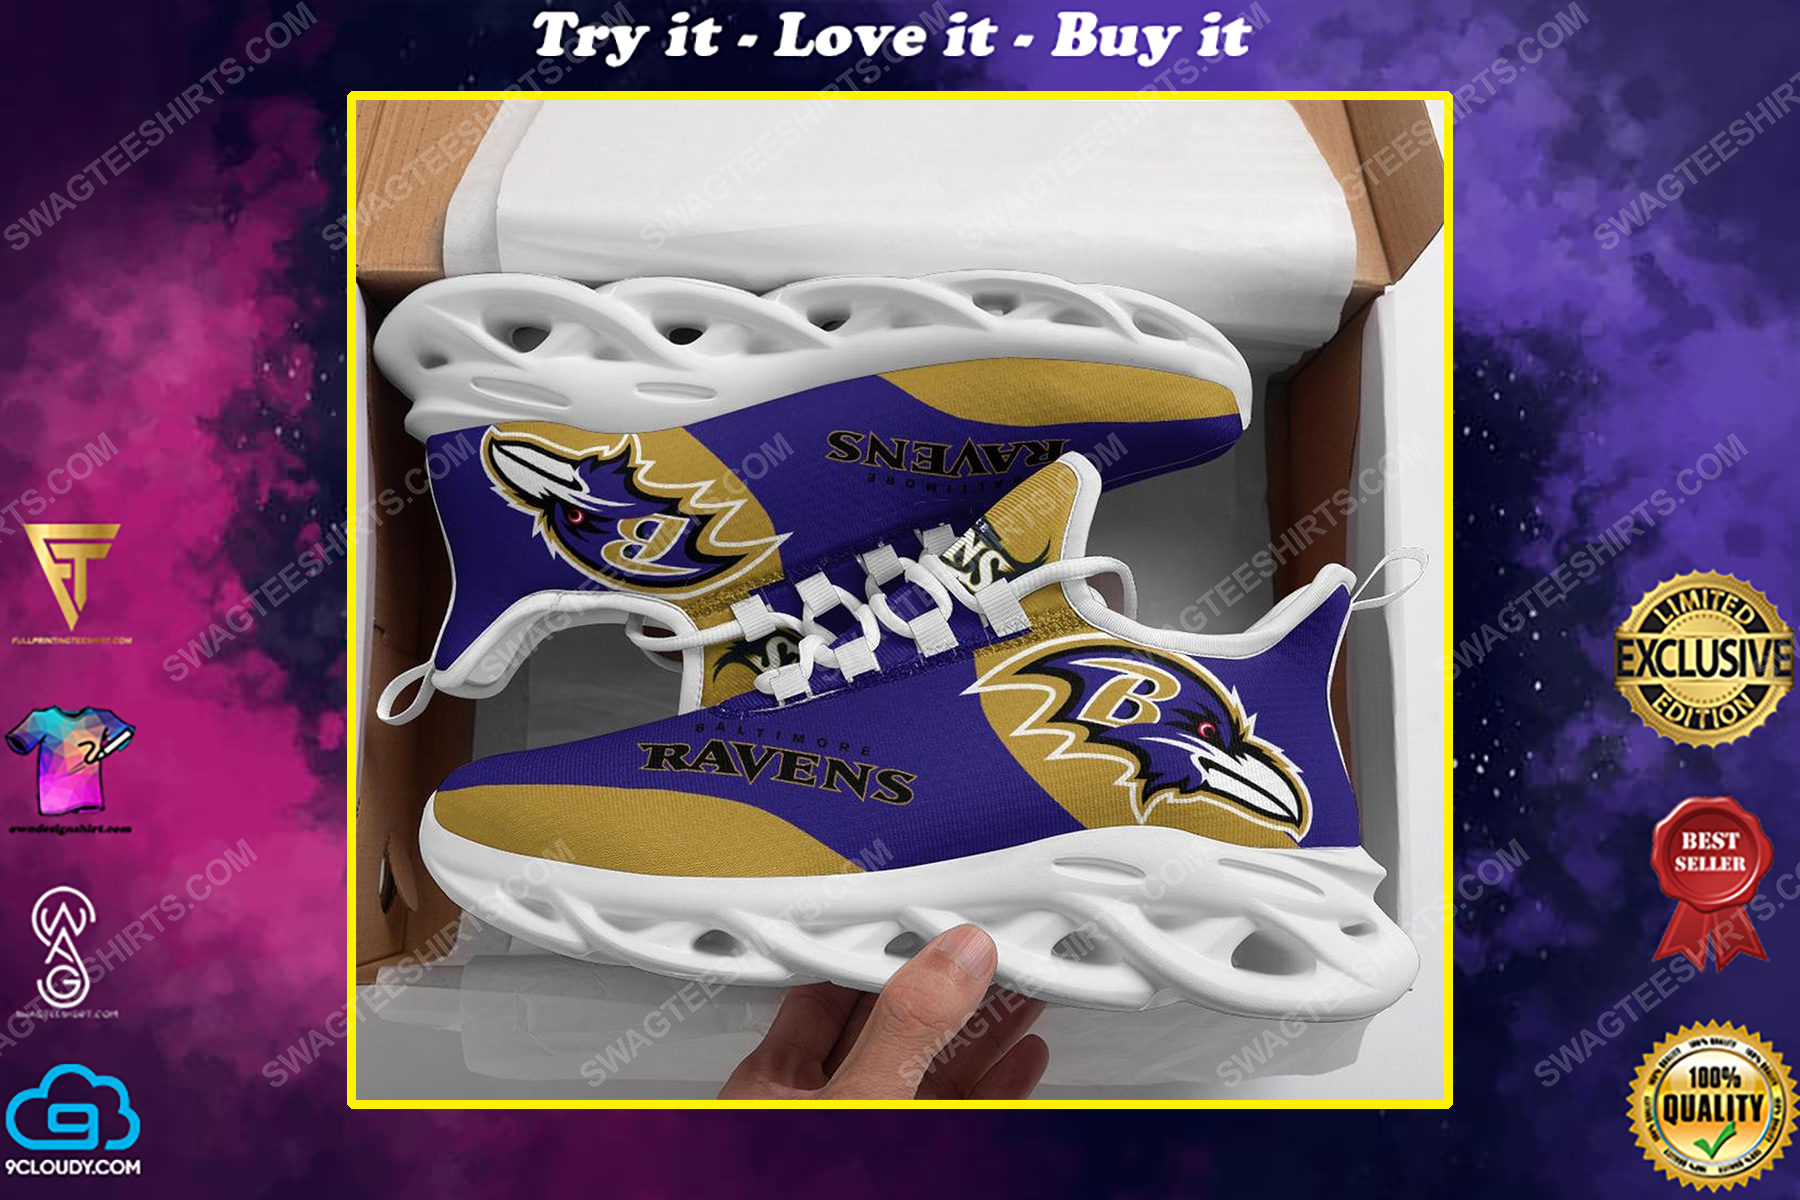 The baltimore ravens football team max soul shoes